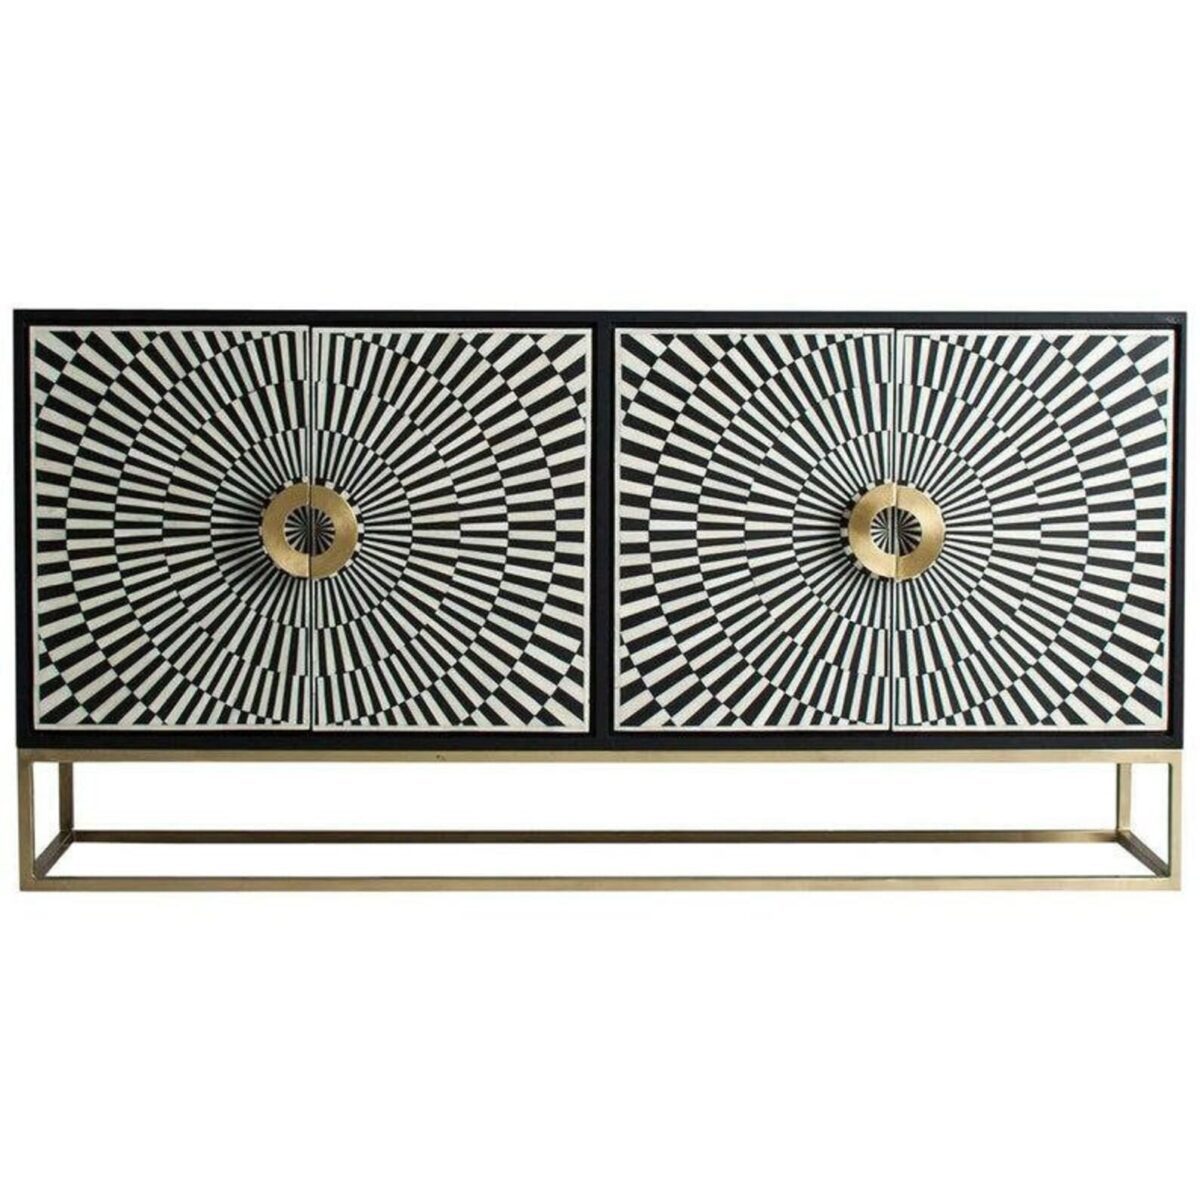 Isabella Bone Inlay Sideboard in Black and White